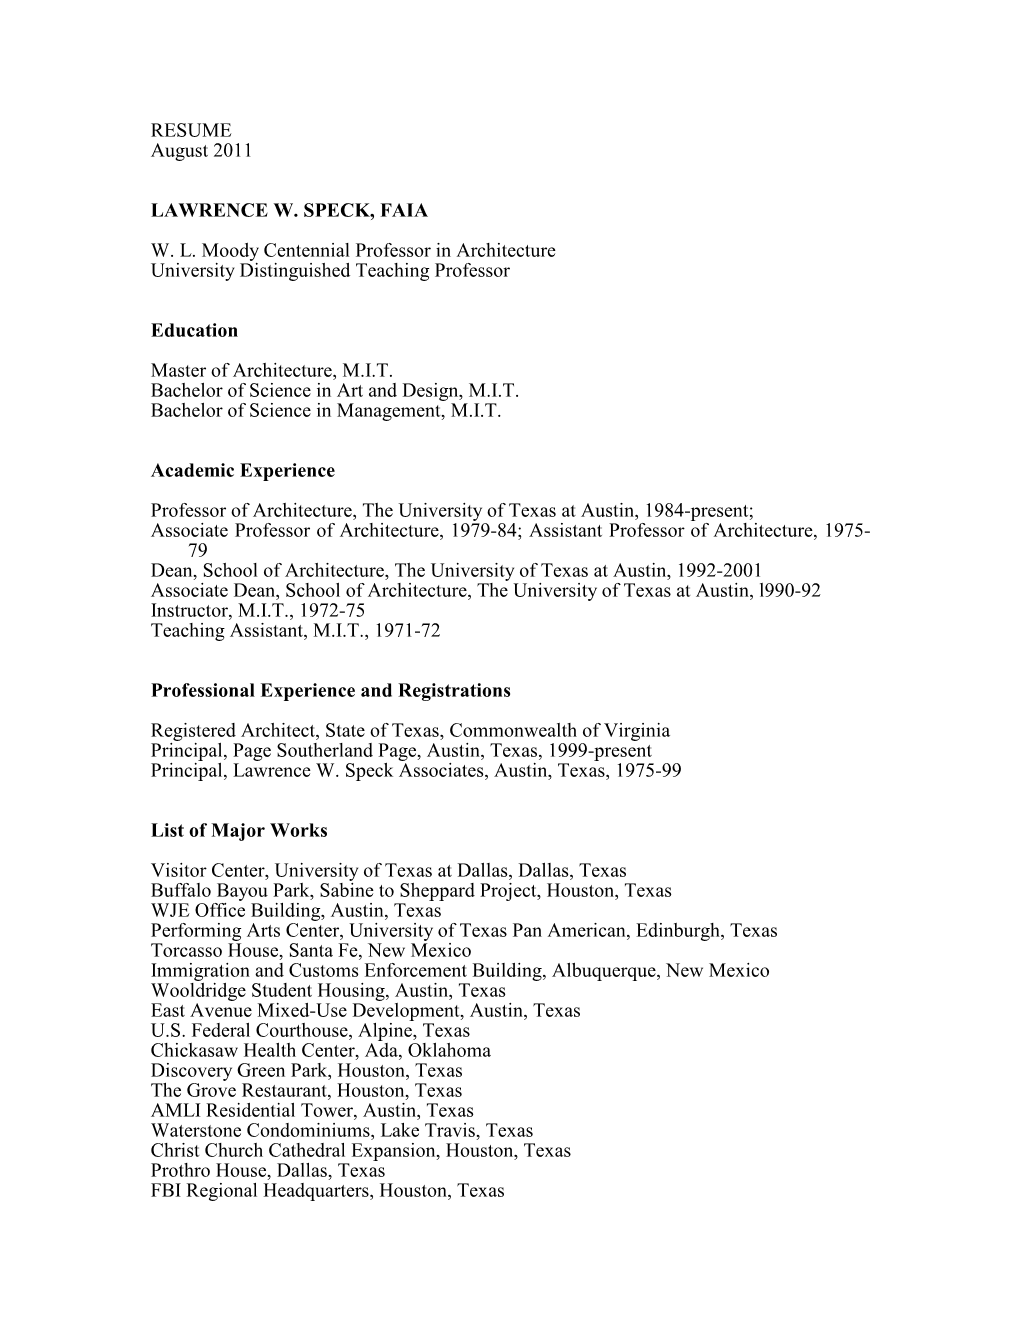 RESUME August 2011 LAWRENCE W. SPECK, FAIA W. L. Moody